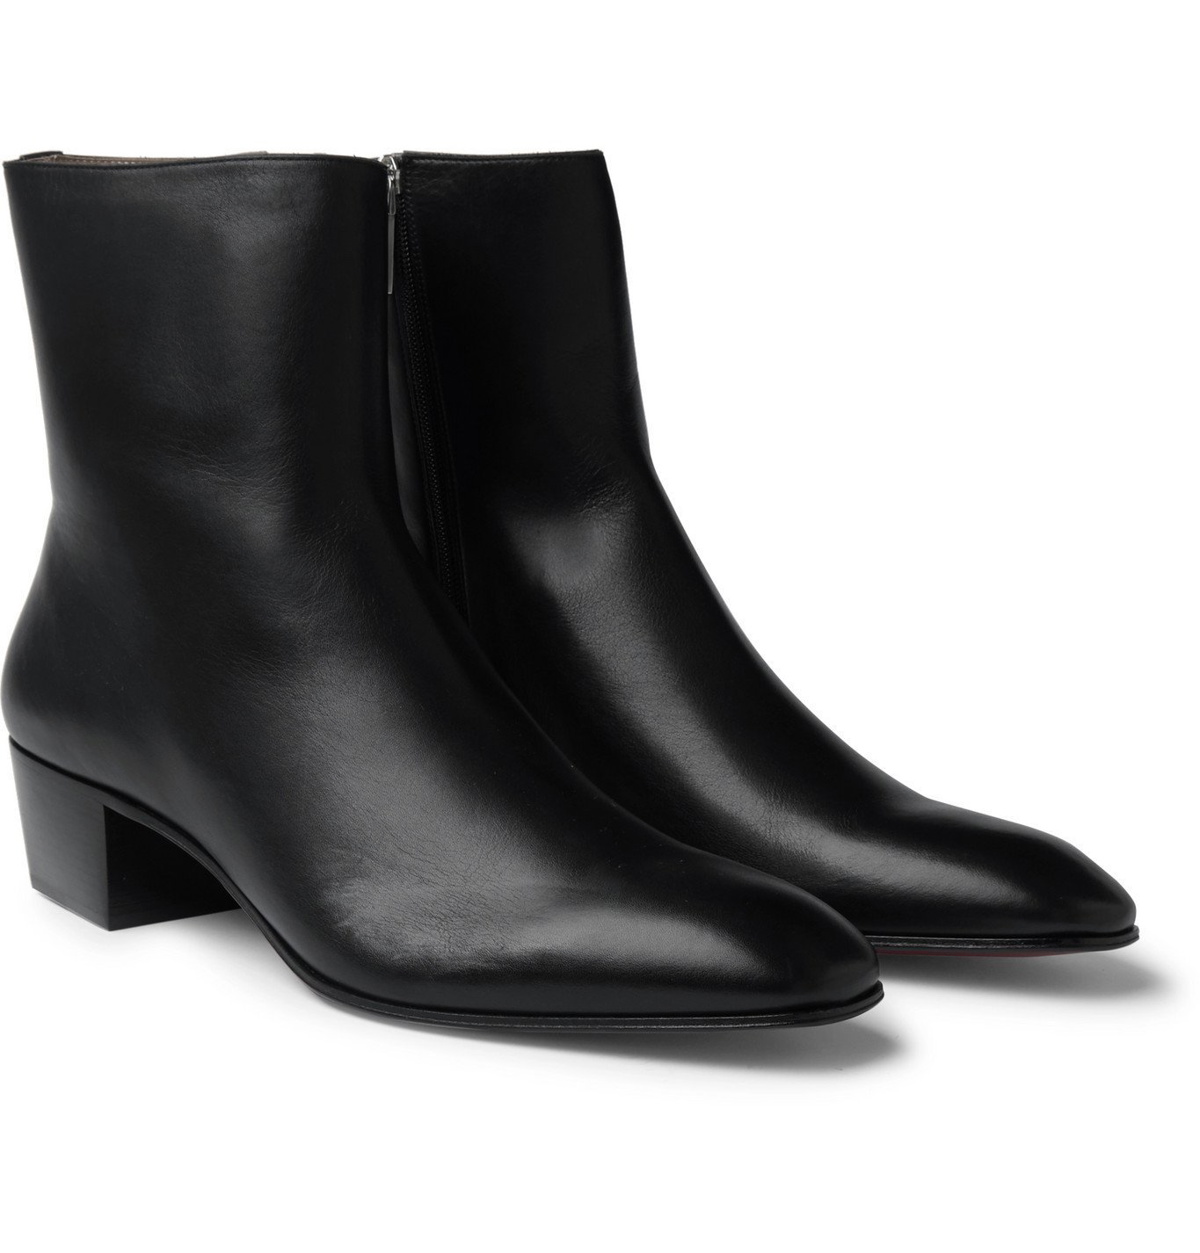 Christian Louboutin Jolly Zip Up Boots in Black for Men